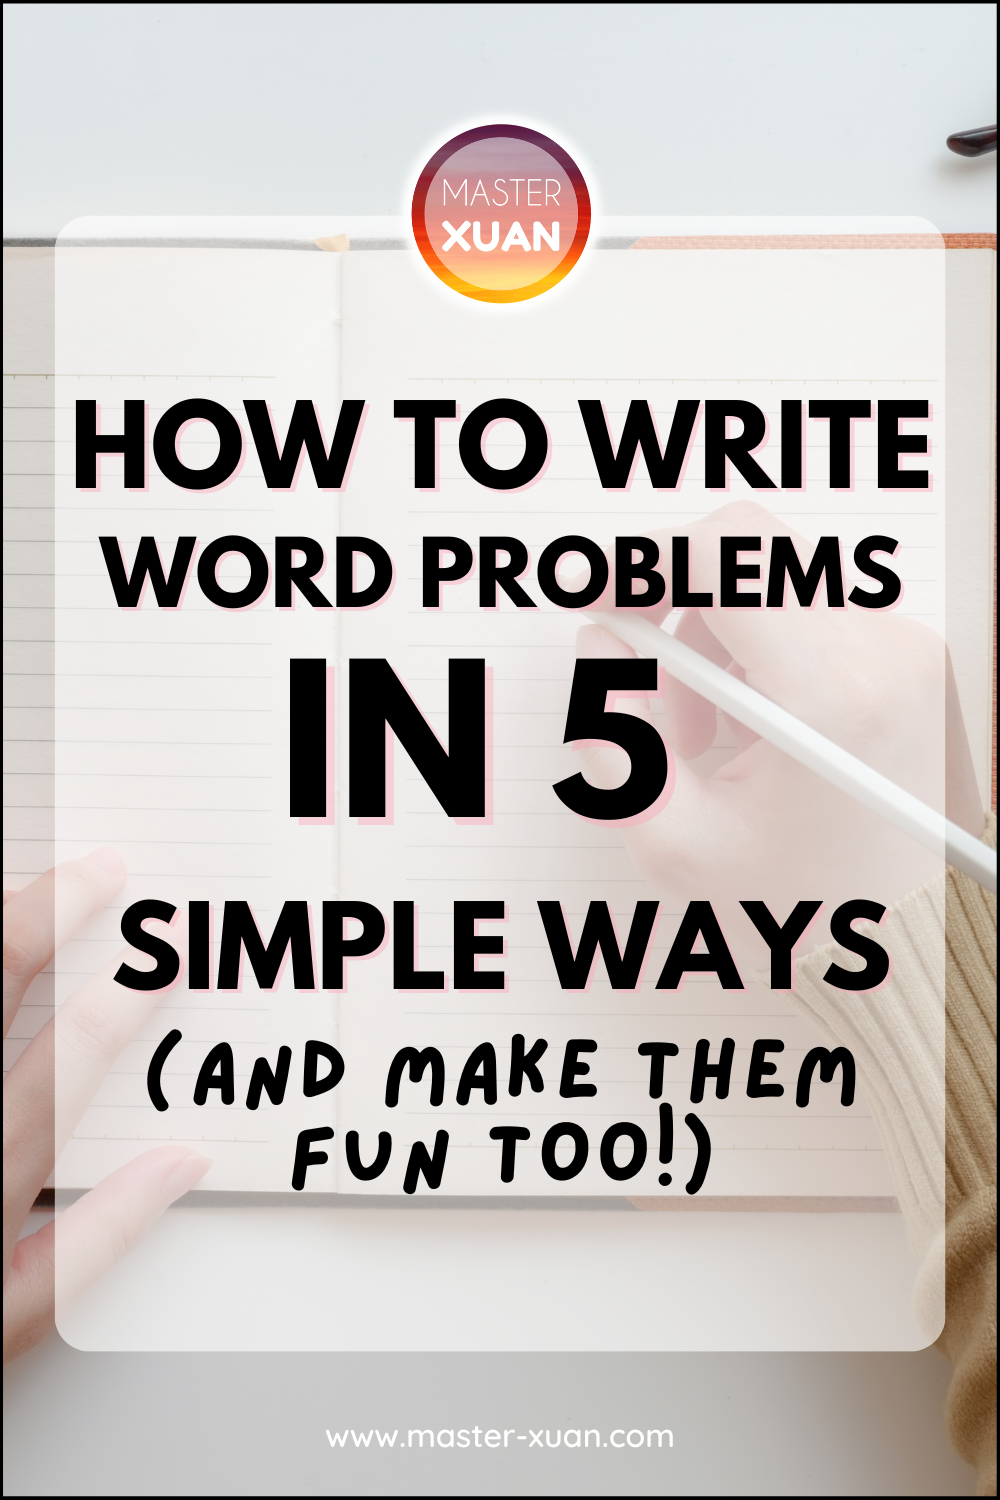 How to write word problems in 5 simple ways and make them fun too!